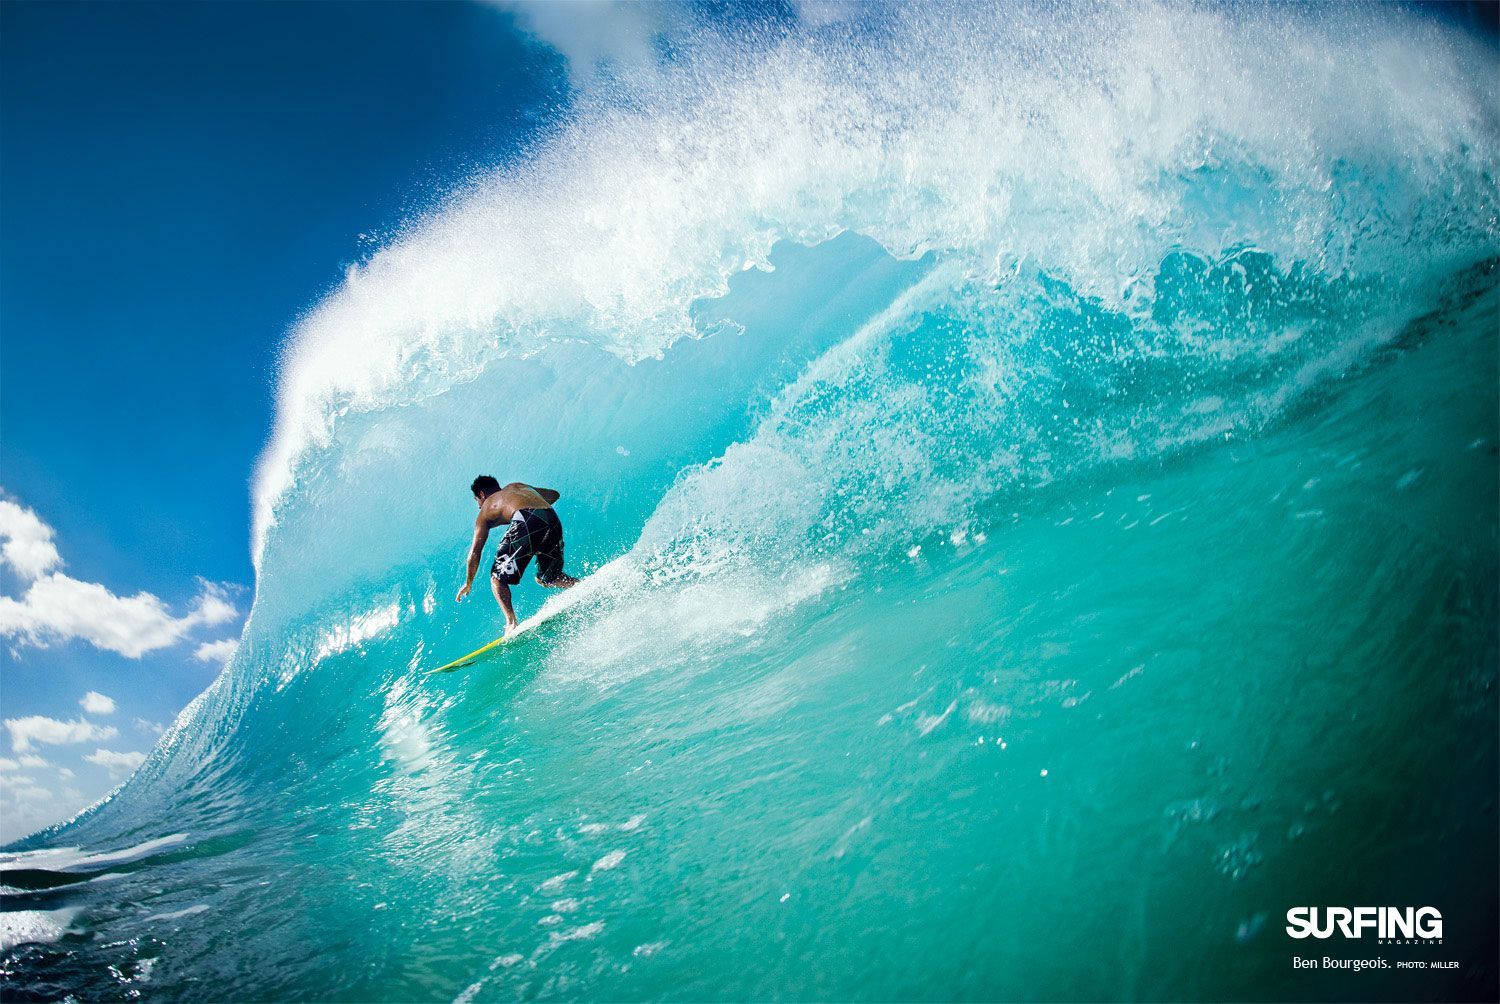 Desktop Wallpapers/Awesome Photos from Surfing Magazine | SURFBANG